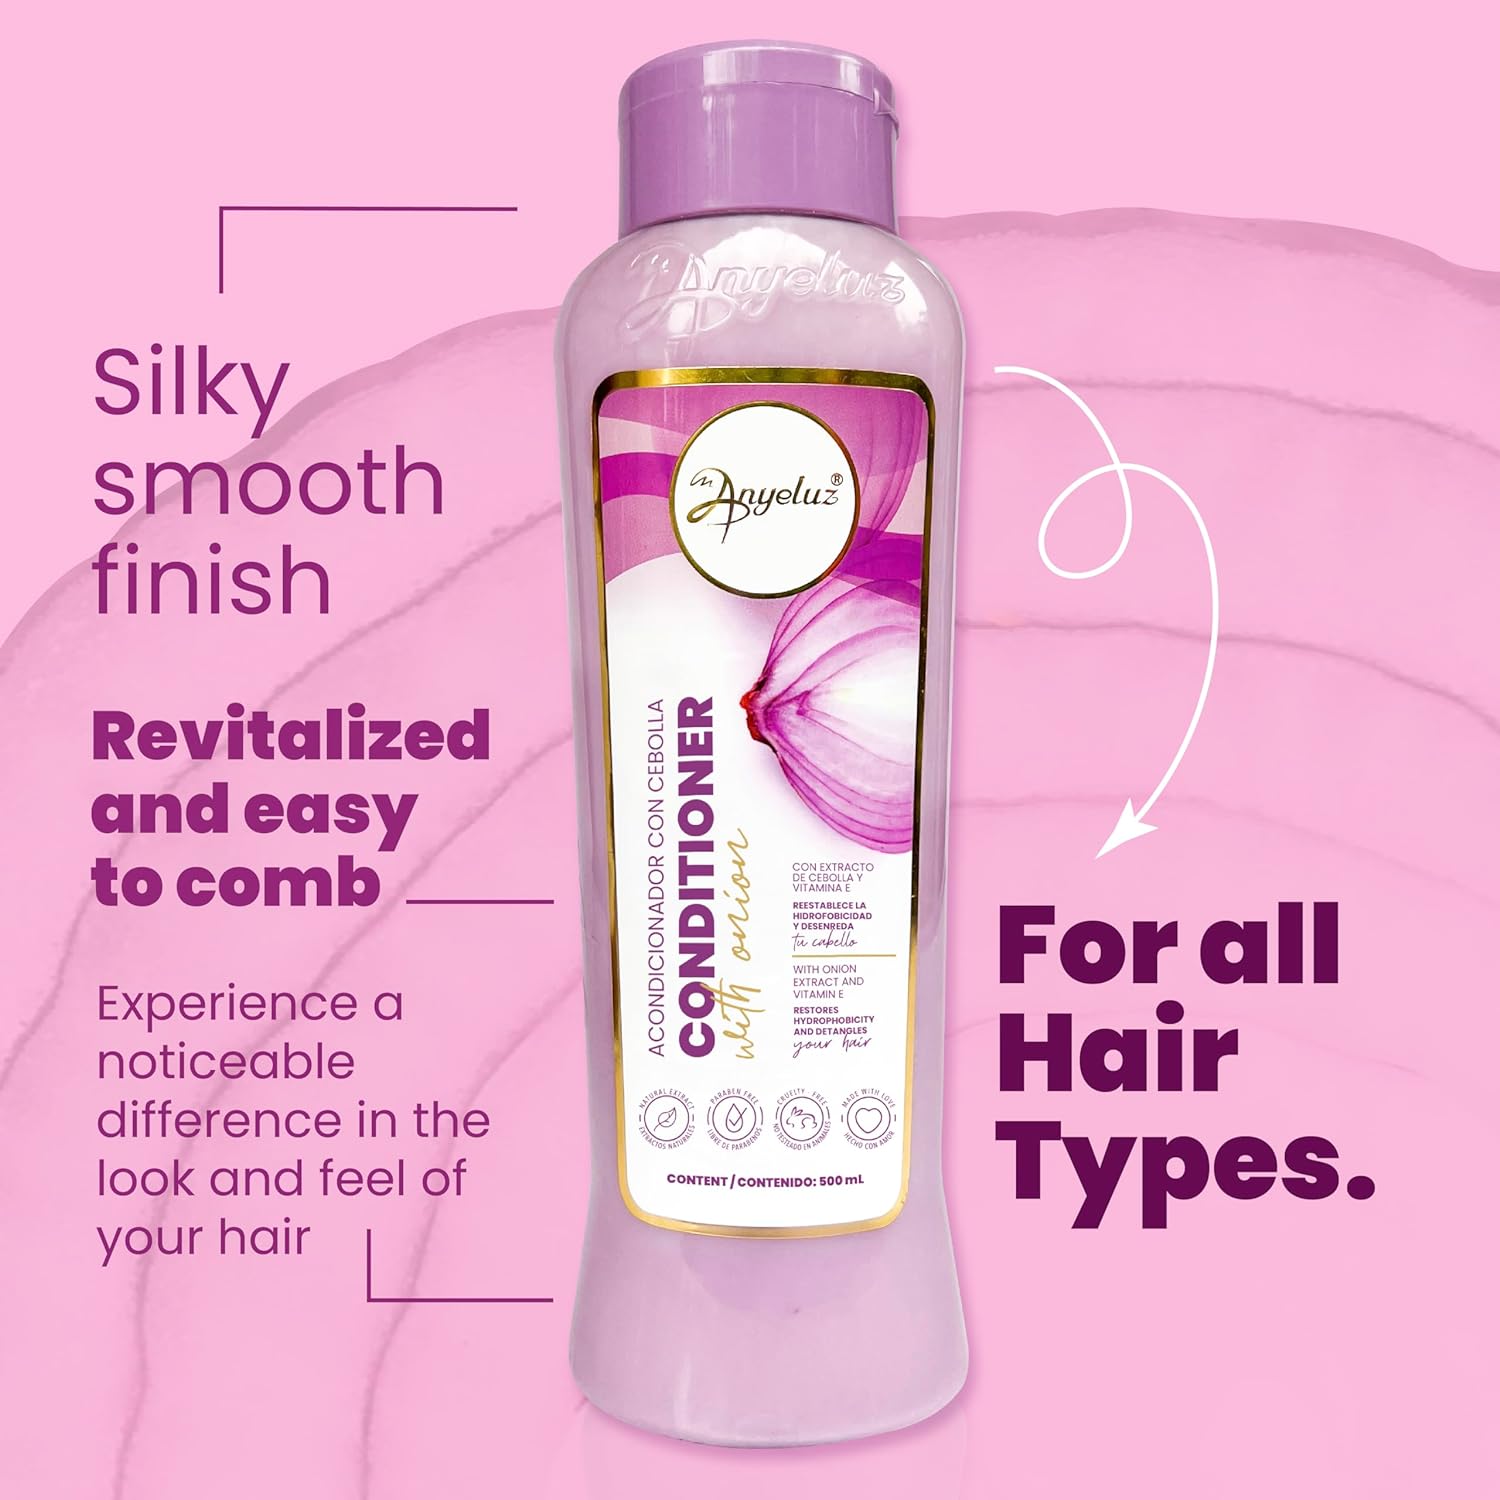 Anyeluz - Onion Conditioner | Enriched with Onion Extract and Vitamin E | Restores Hydrophobicity and Detangles Hair Effortlessly | Leaves Hair Silky and Revitalized| For All Hair Types